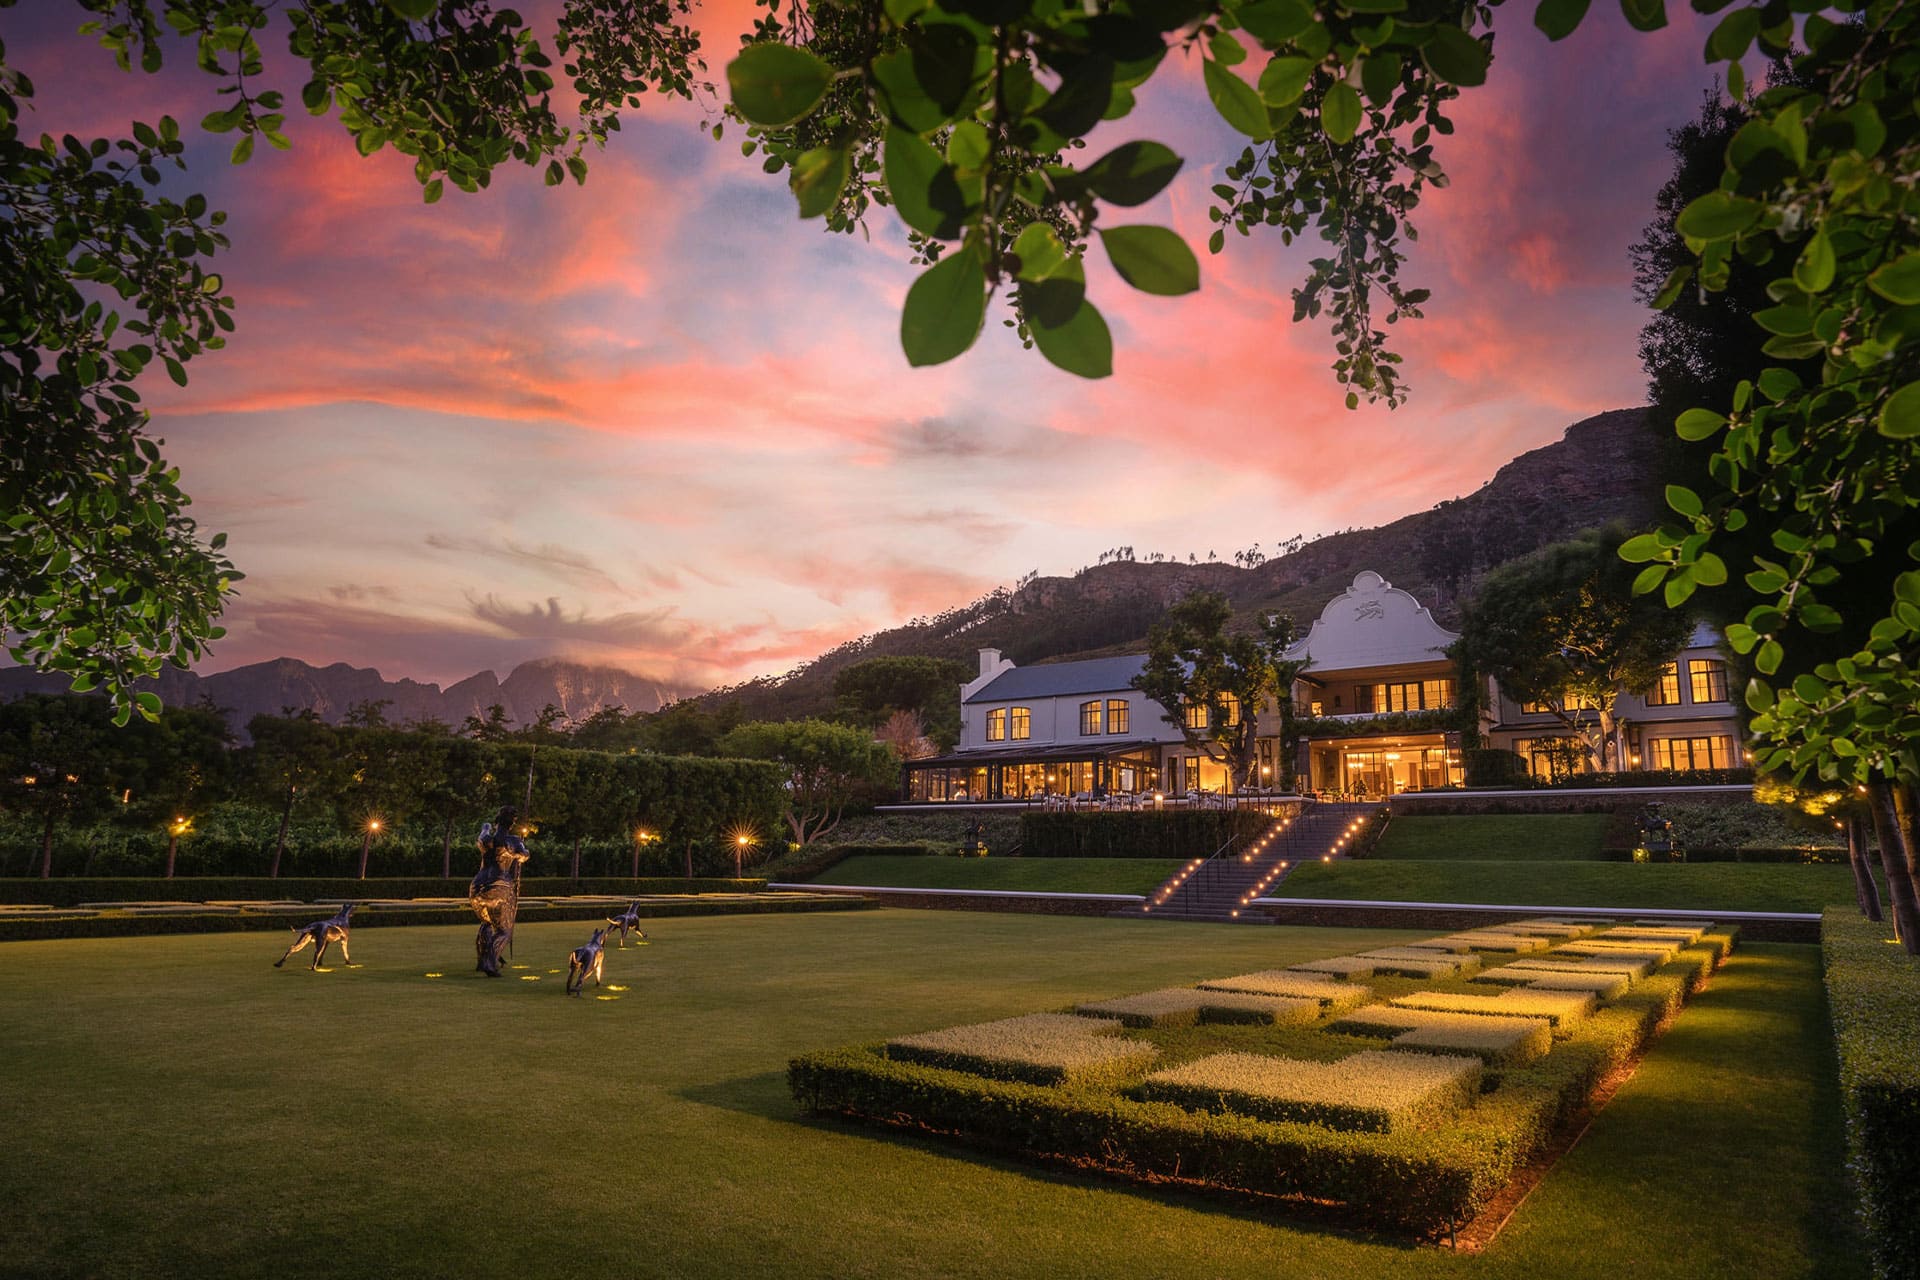 The garden and hotel during sunset at Leeu Estates